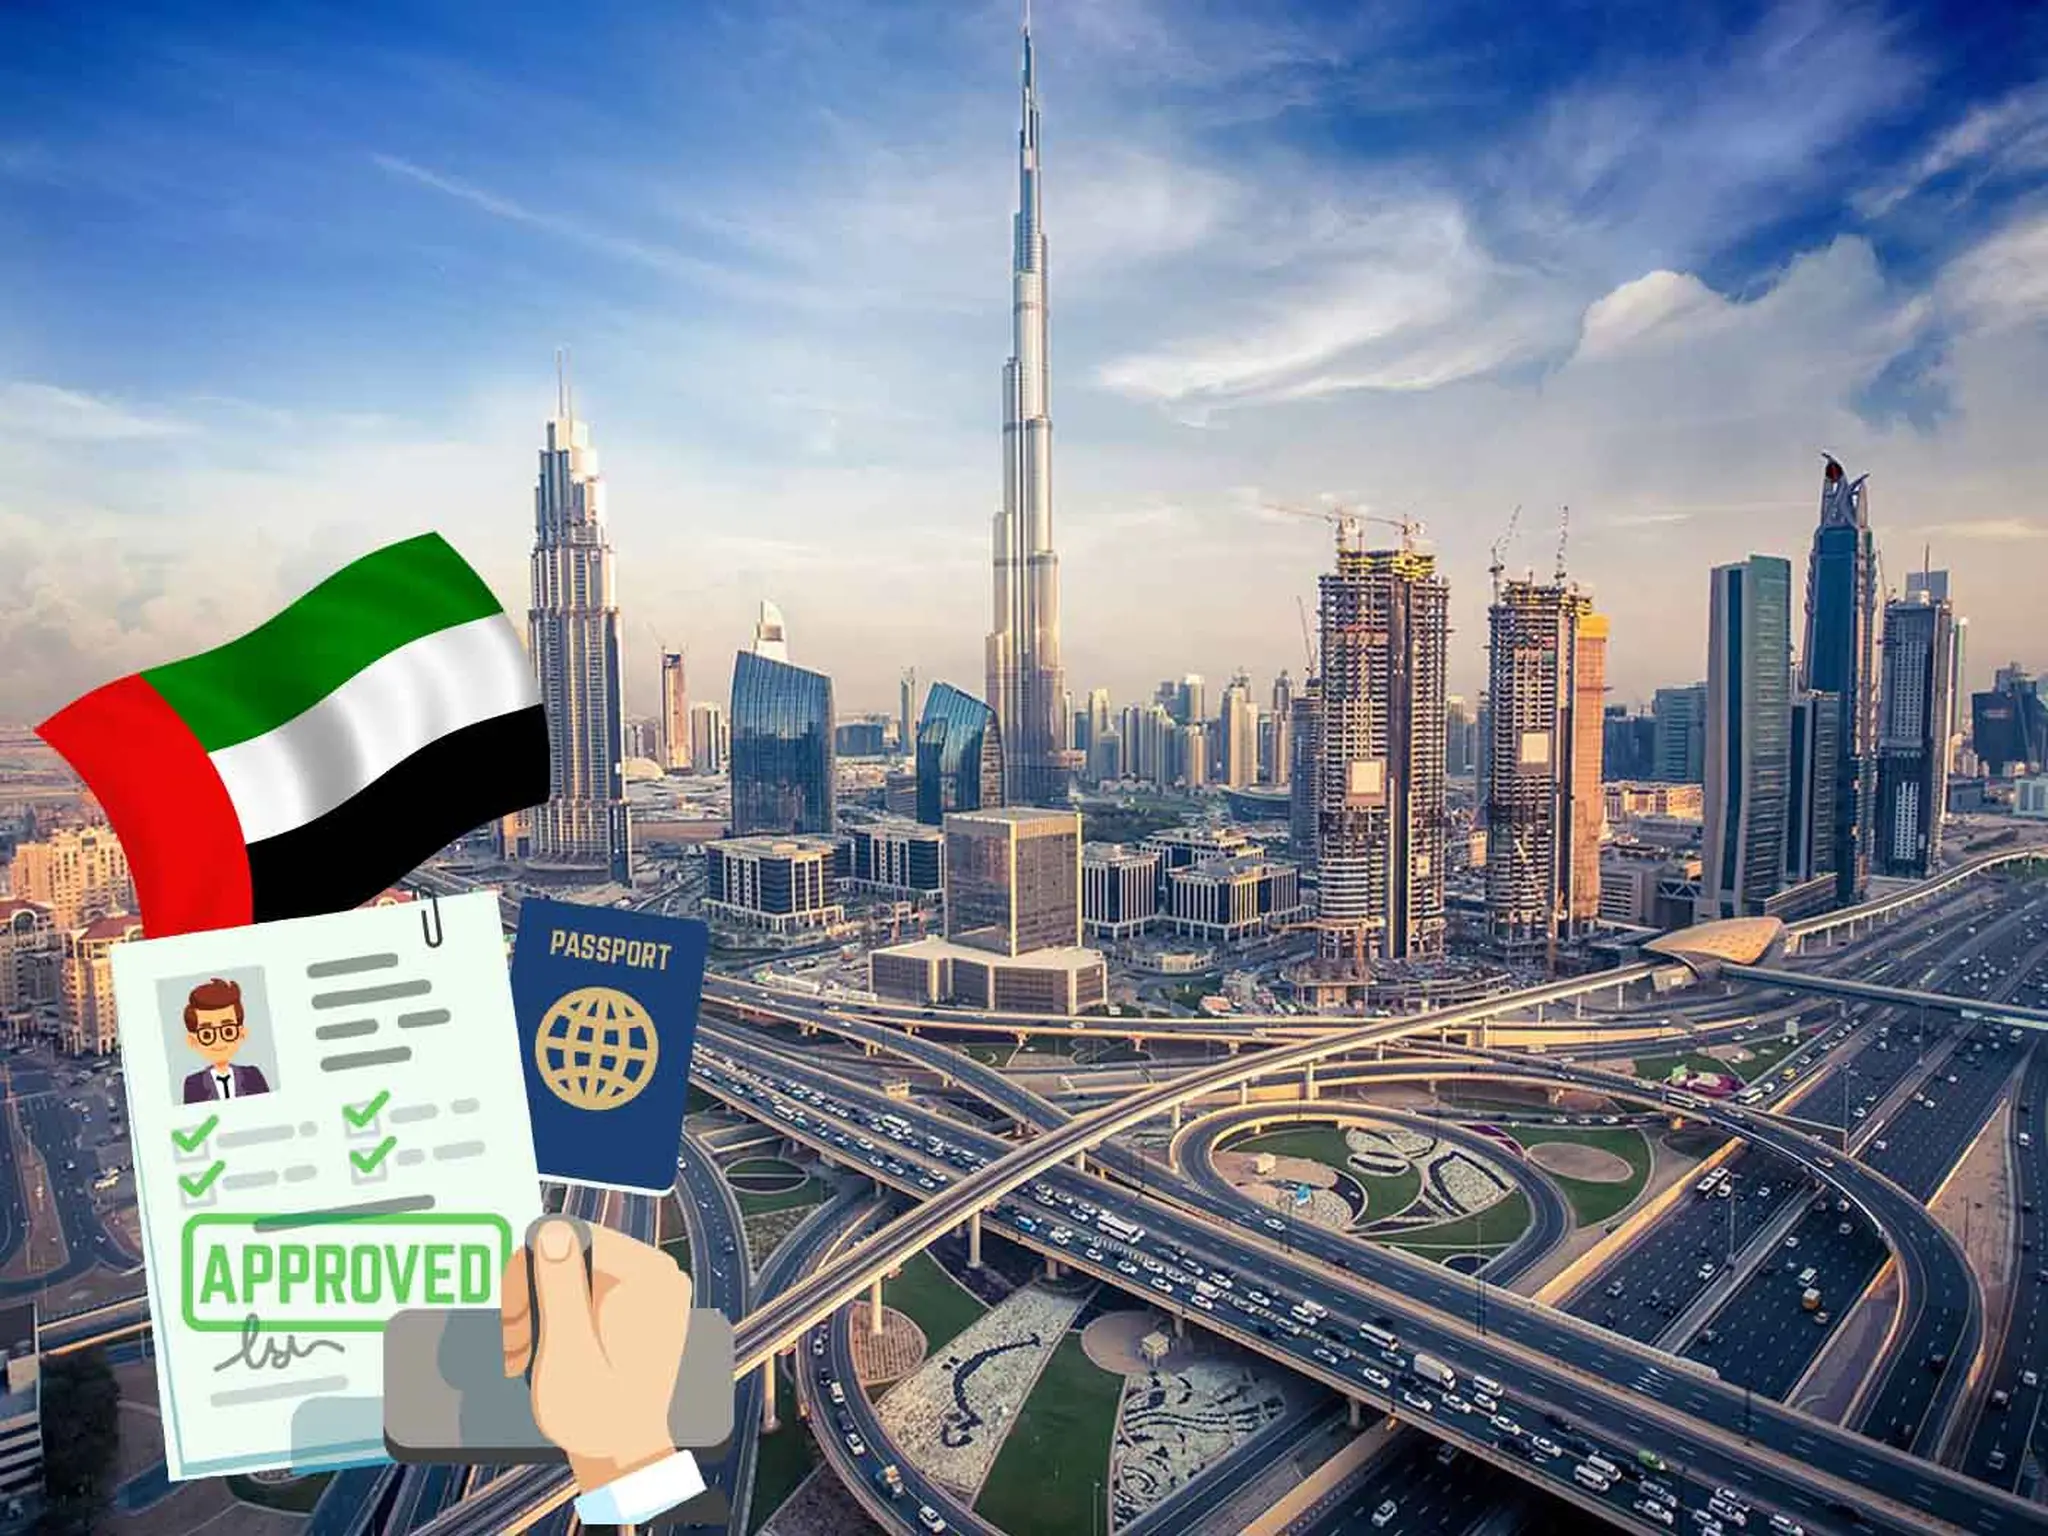 The UAE sets only 600 dirhams to extend visit visas for 30 days